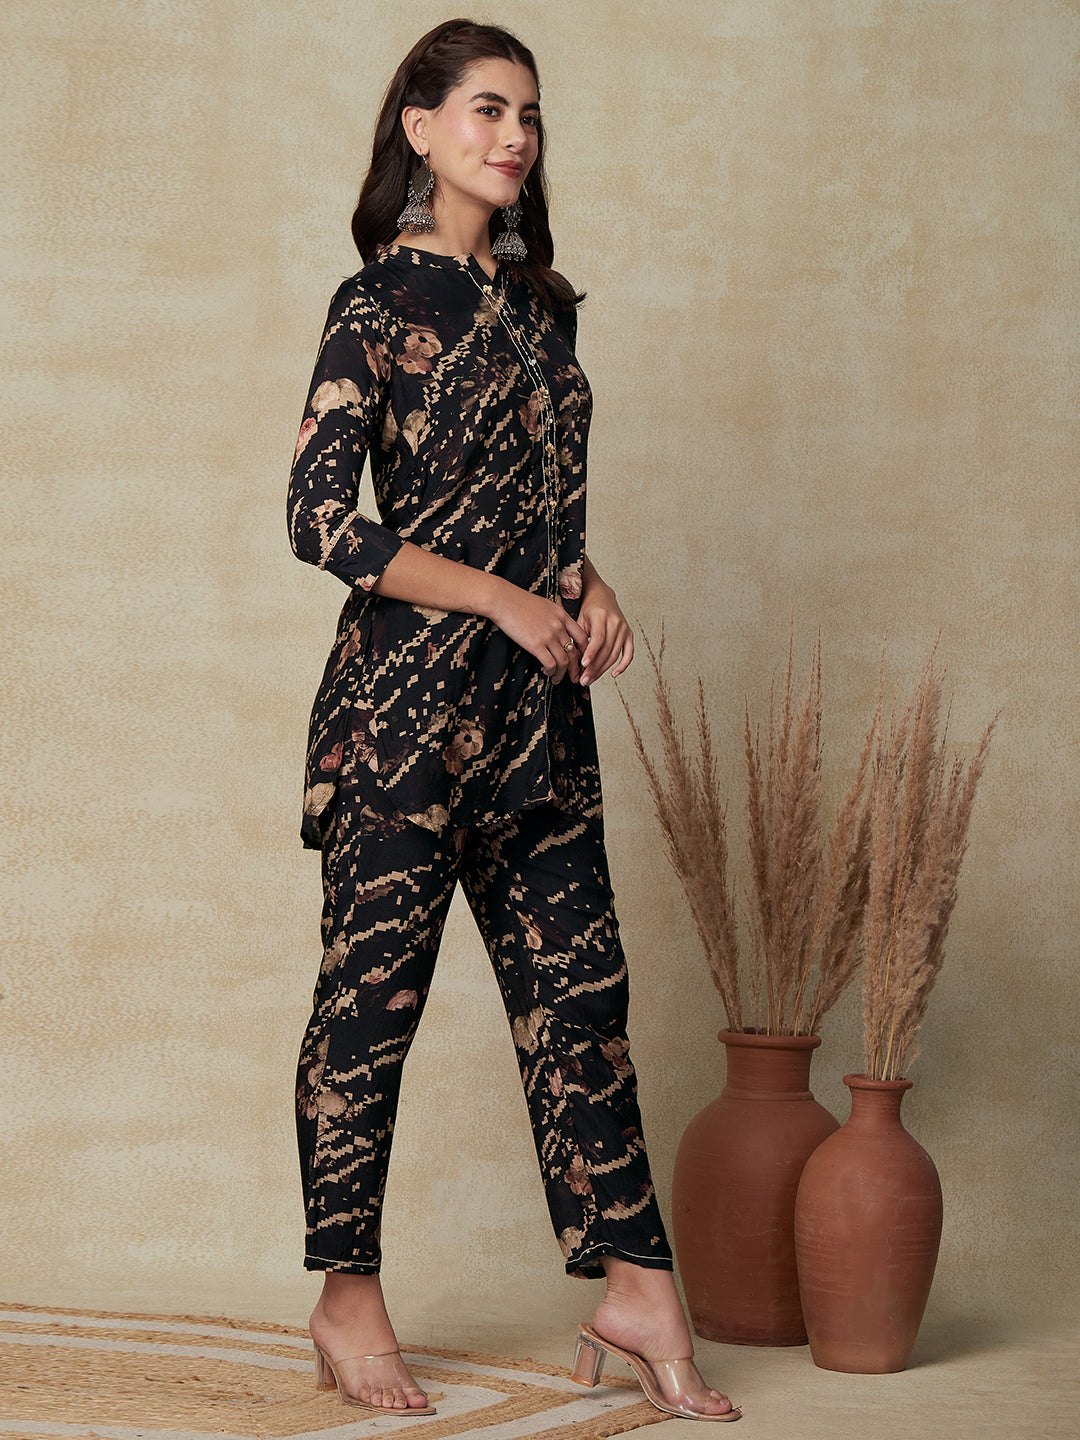 Abstract & Floral Printed Sequins Embellished Kurti with Pants Indo-western Co-ord Set - Black